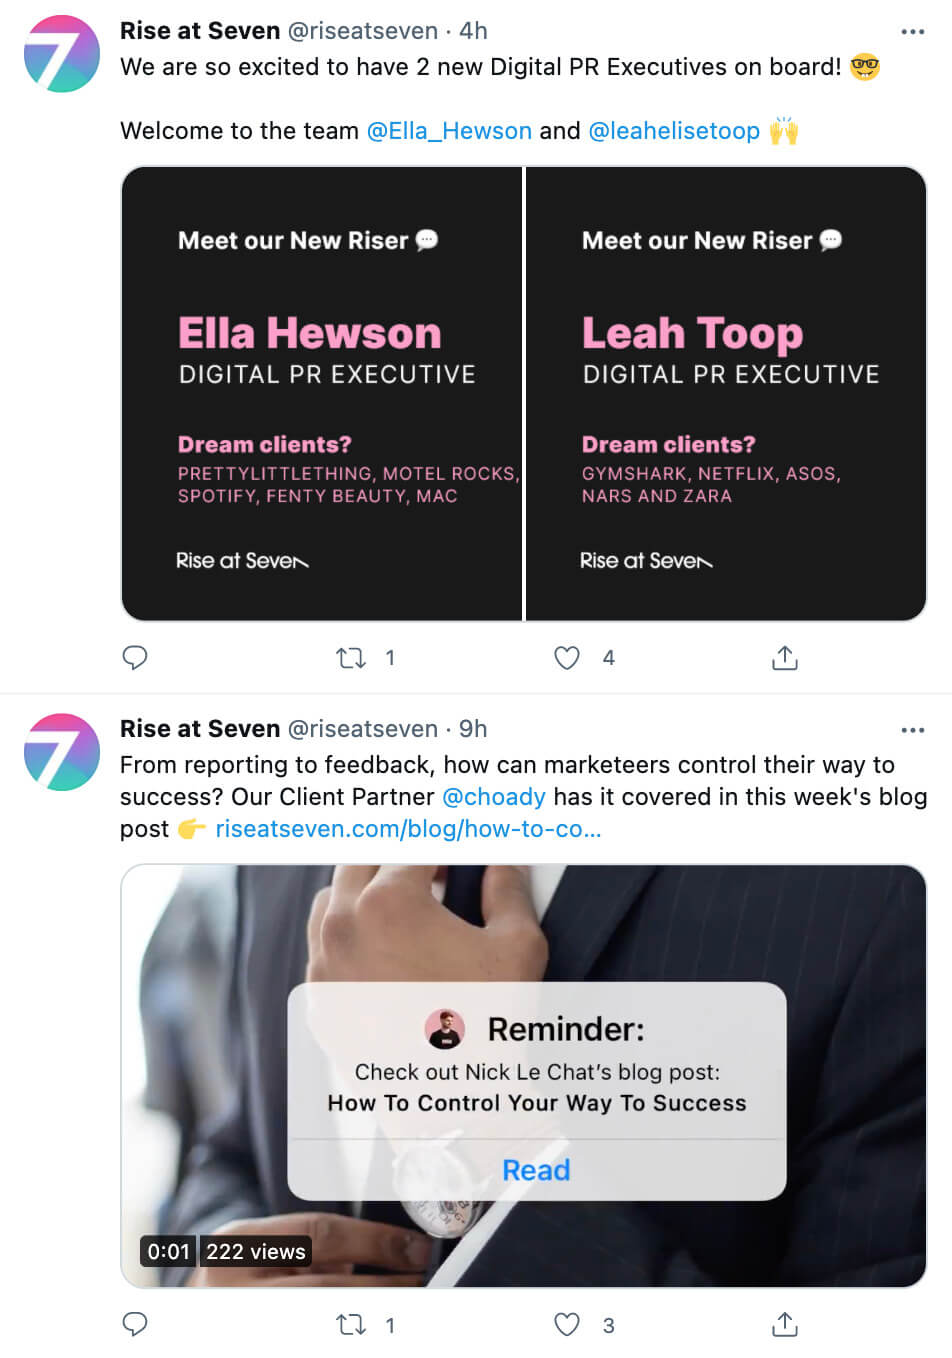 Screenshot of Rise at Sevens tweets sharing new employees joining